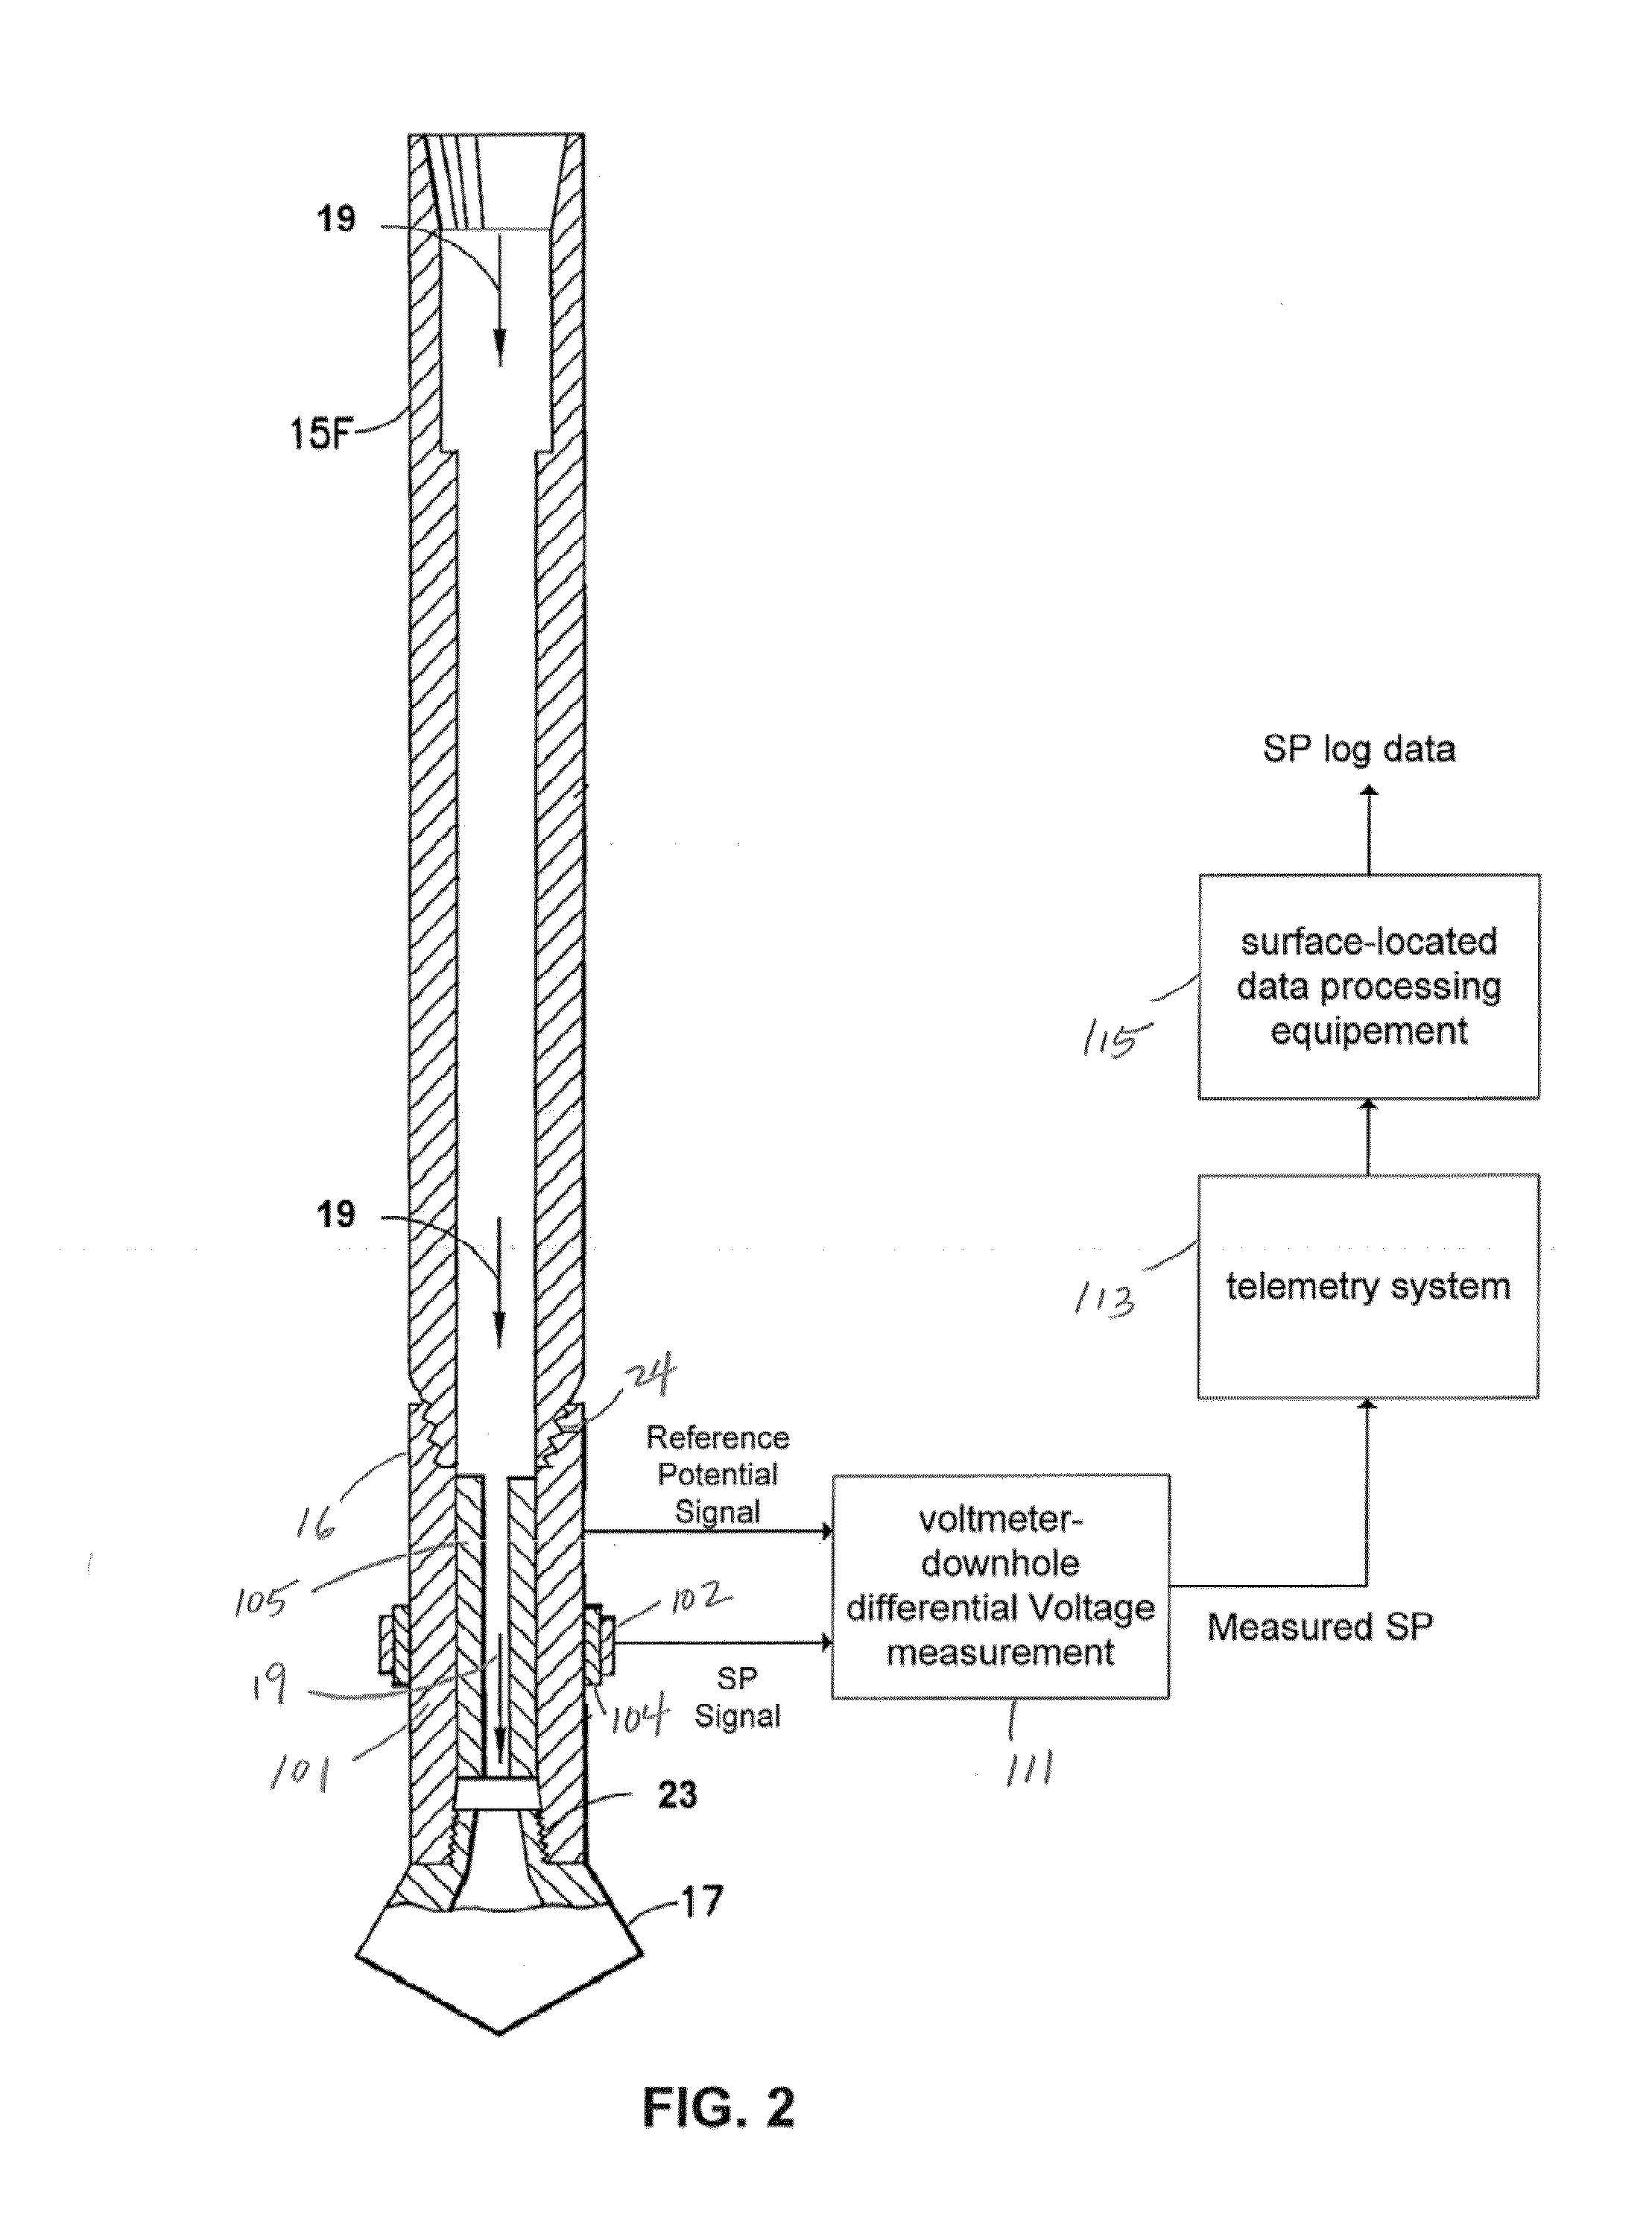 Apparatus and methods for measuring spontaneous potential of an earth formation